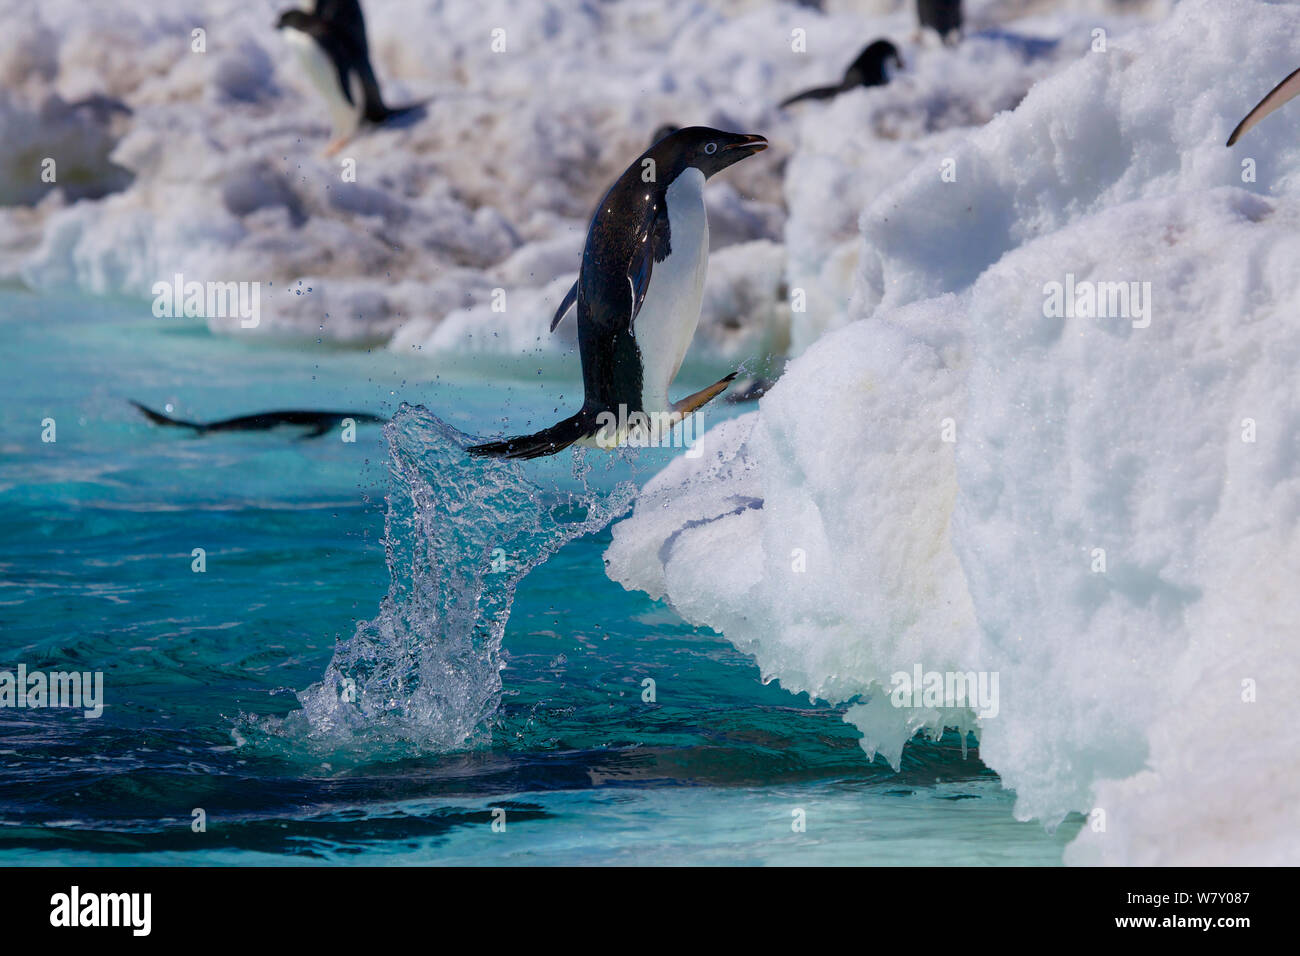 Adelie penguin (Pygoscelis adeliae) jumping out of the water, Antarctica. Stock Photo